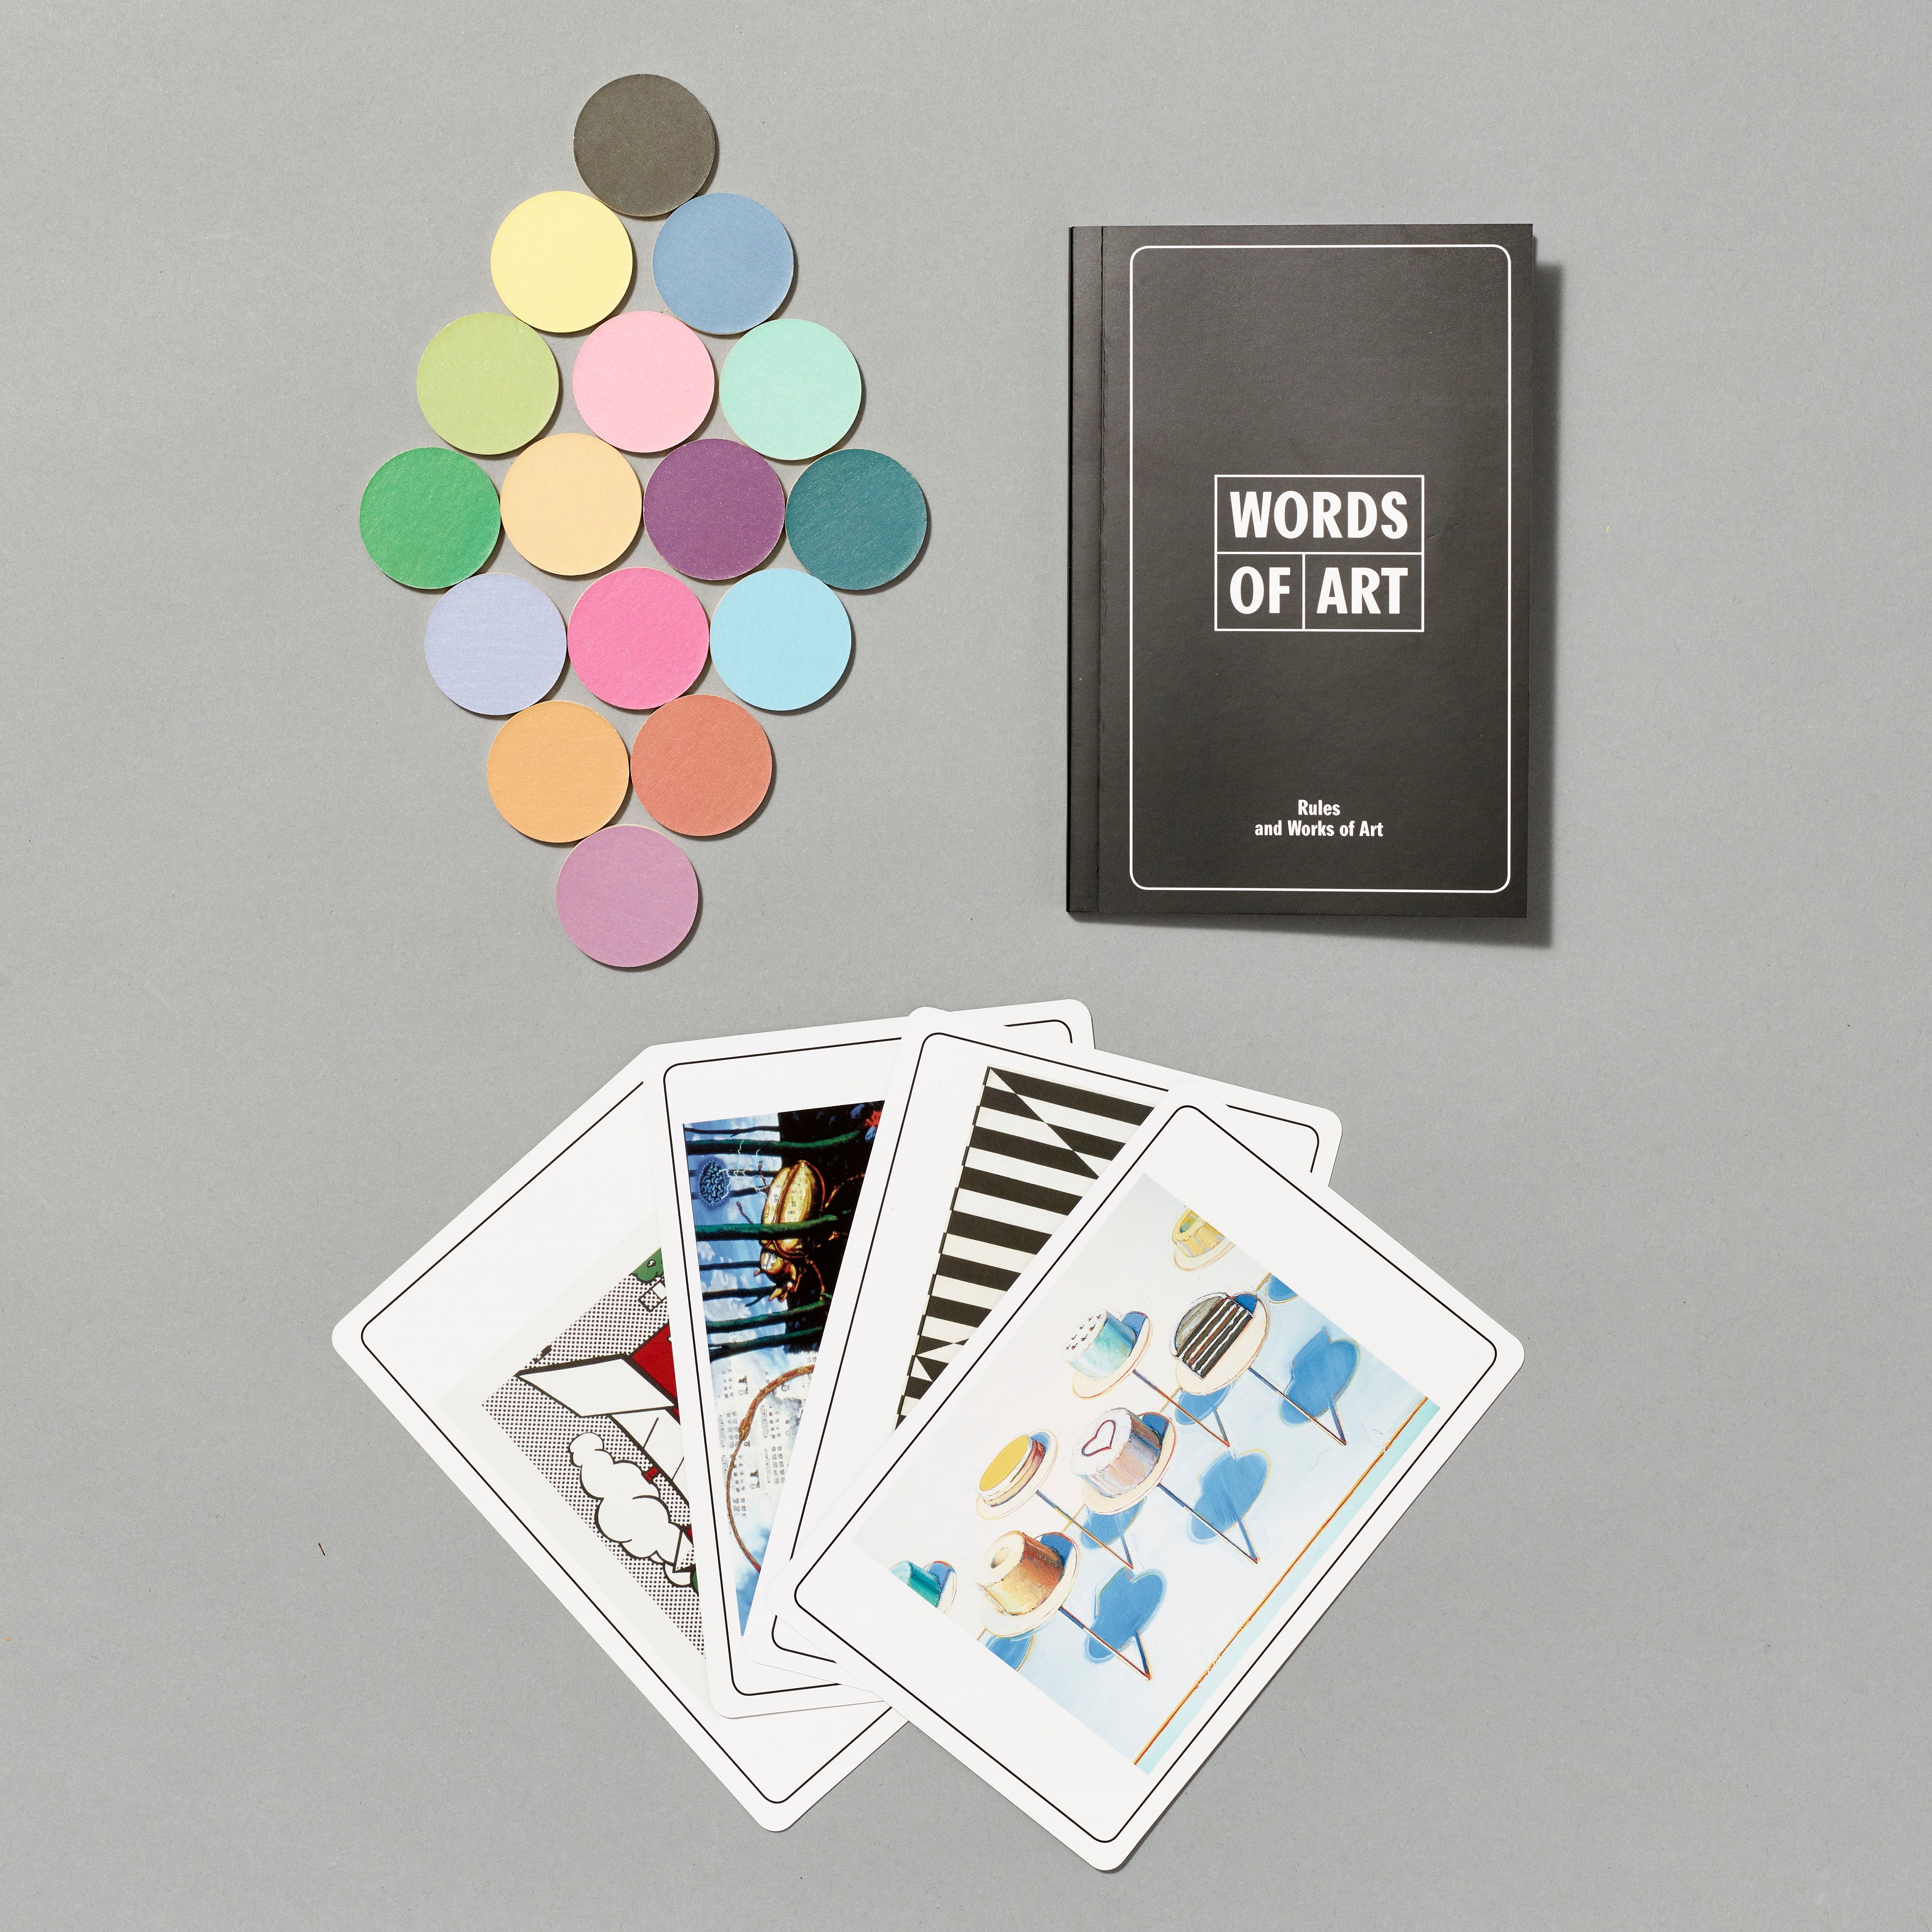 Words of art box set pieces featuring tokens, rule book, and assortment of cards.